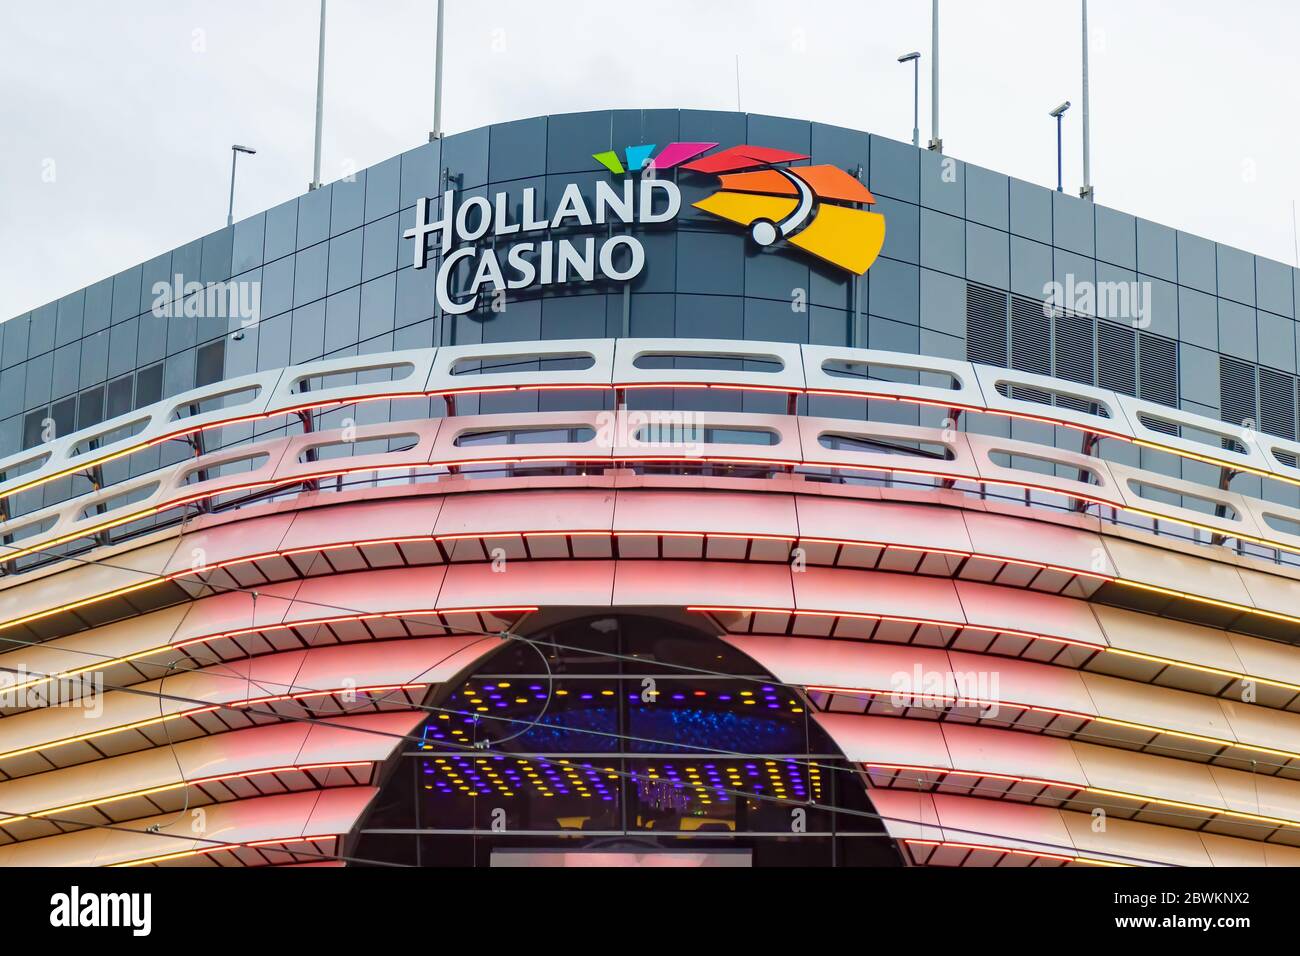 The Hague, The Netherlands - January 14, 2020: View at the entrance of the Holland Casino gambling facility  in the Dutch city of The Hague in Scheven Stock Photo